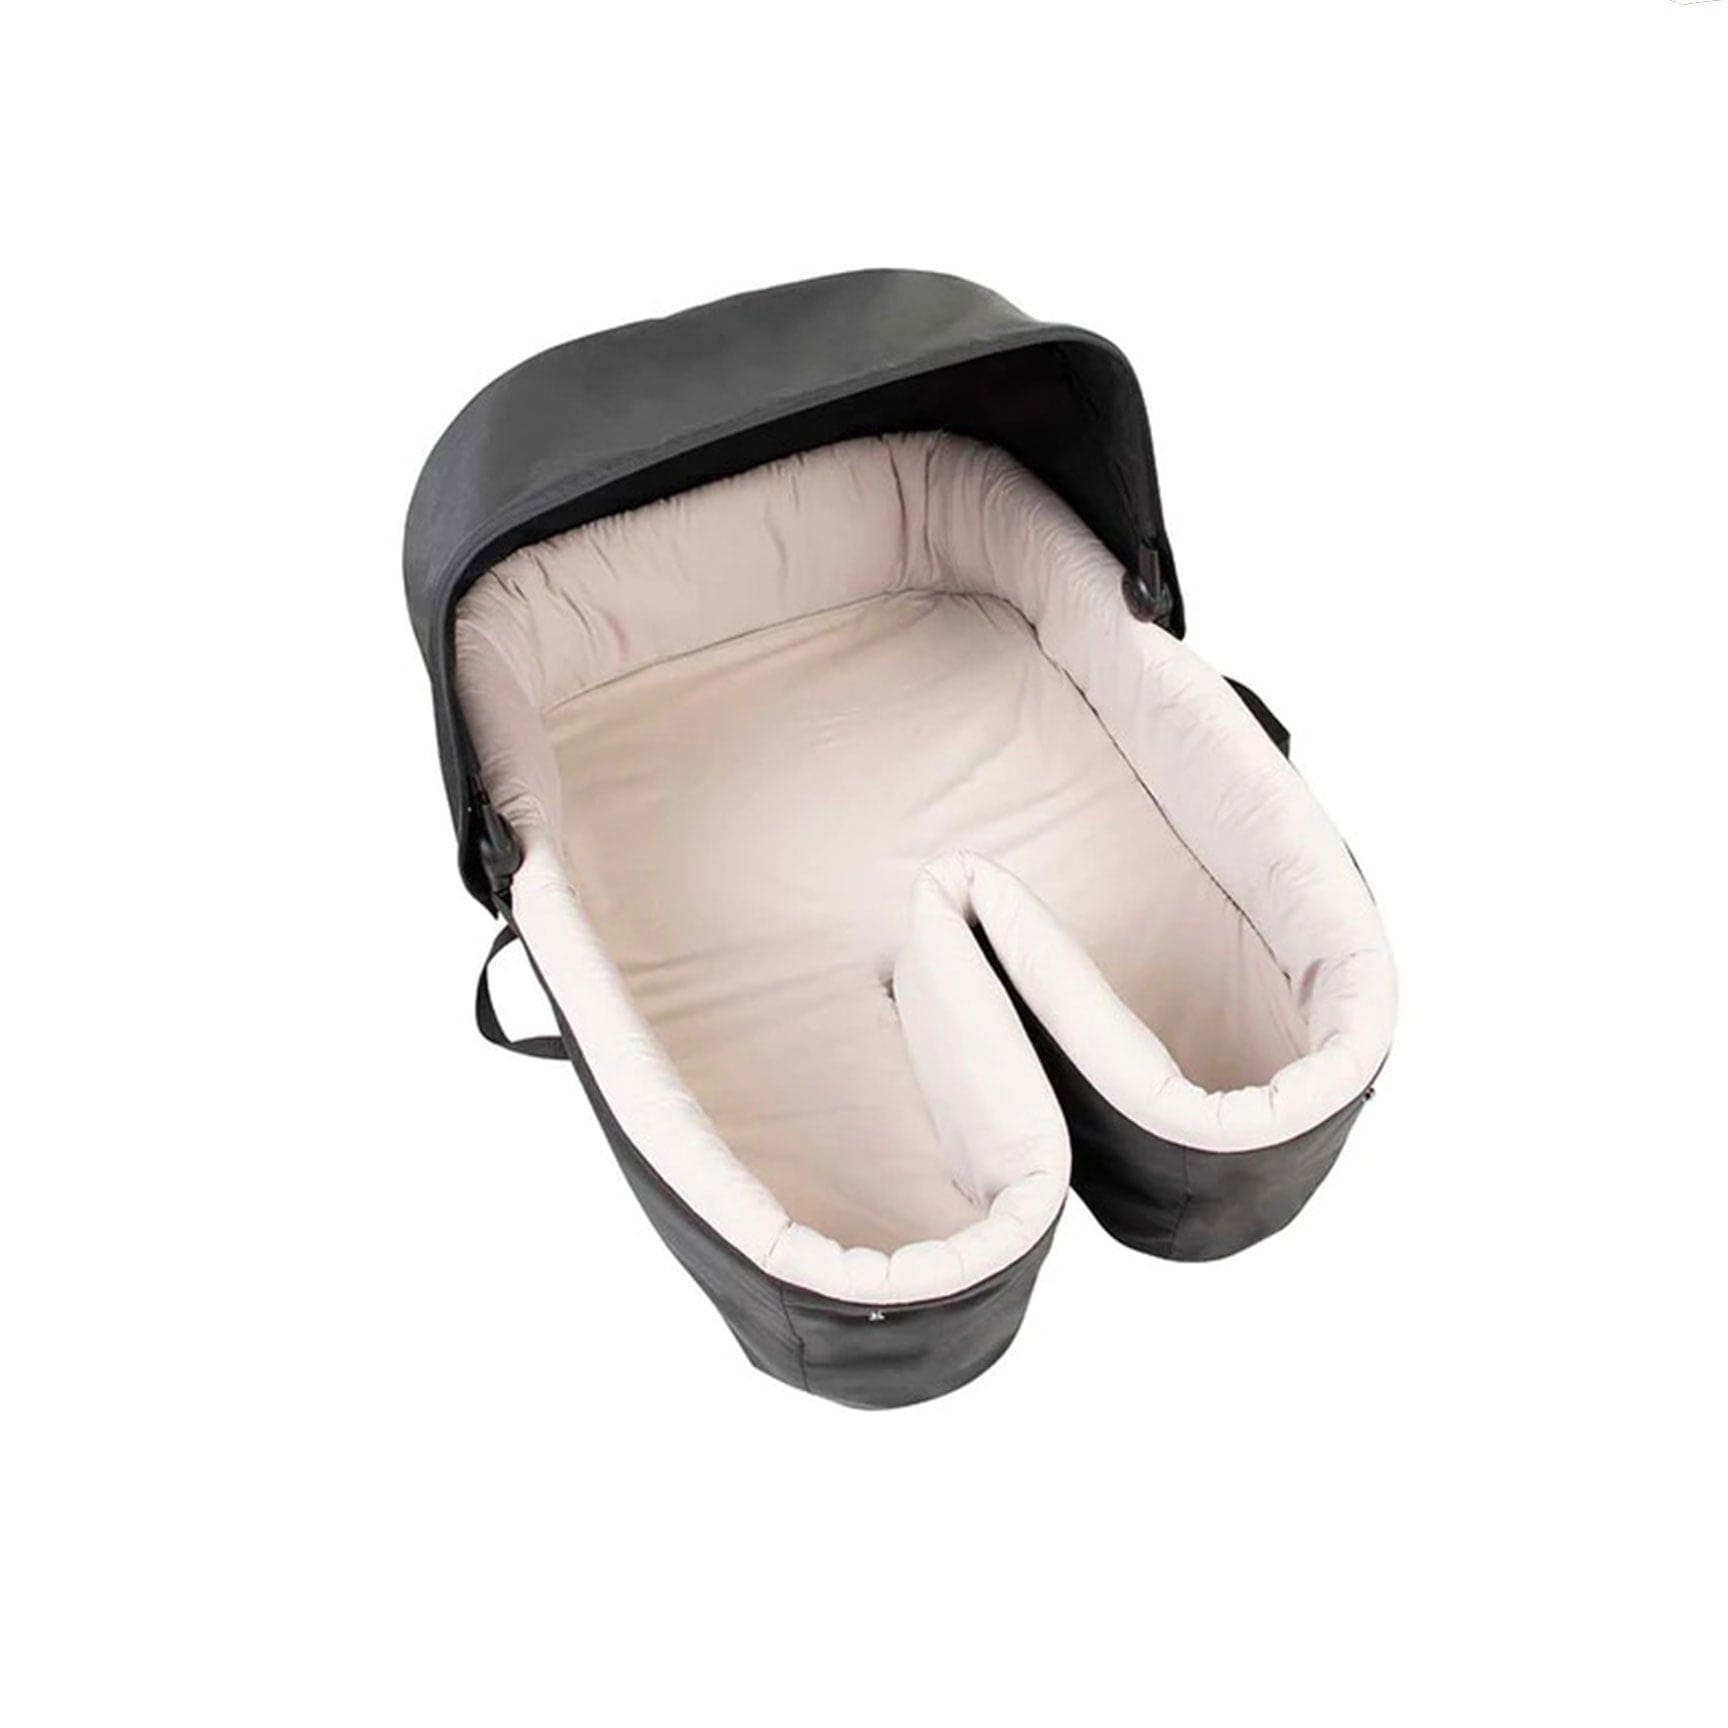 Mountain Buggy Chassis & Carrycots Mountain Buggy Twin Carrycot Plus - Black MB-CCPDTWIN-V3.2